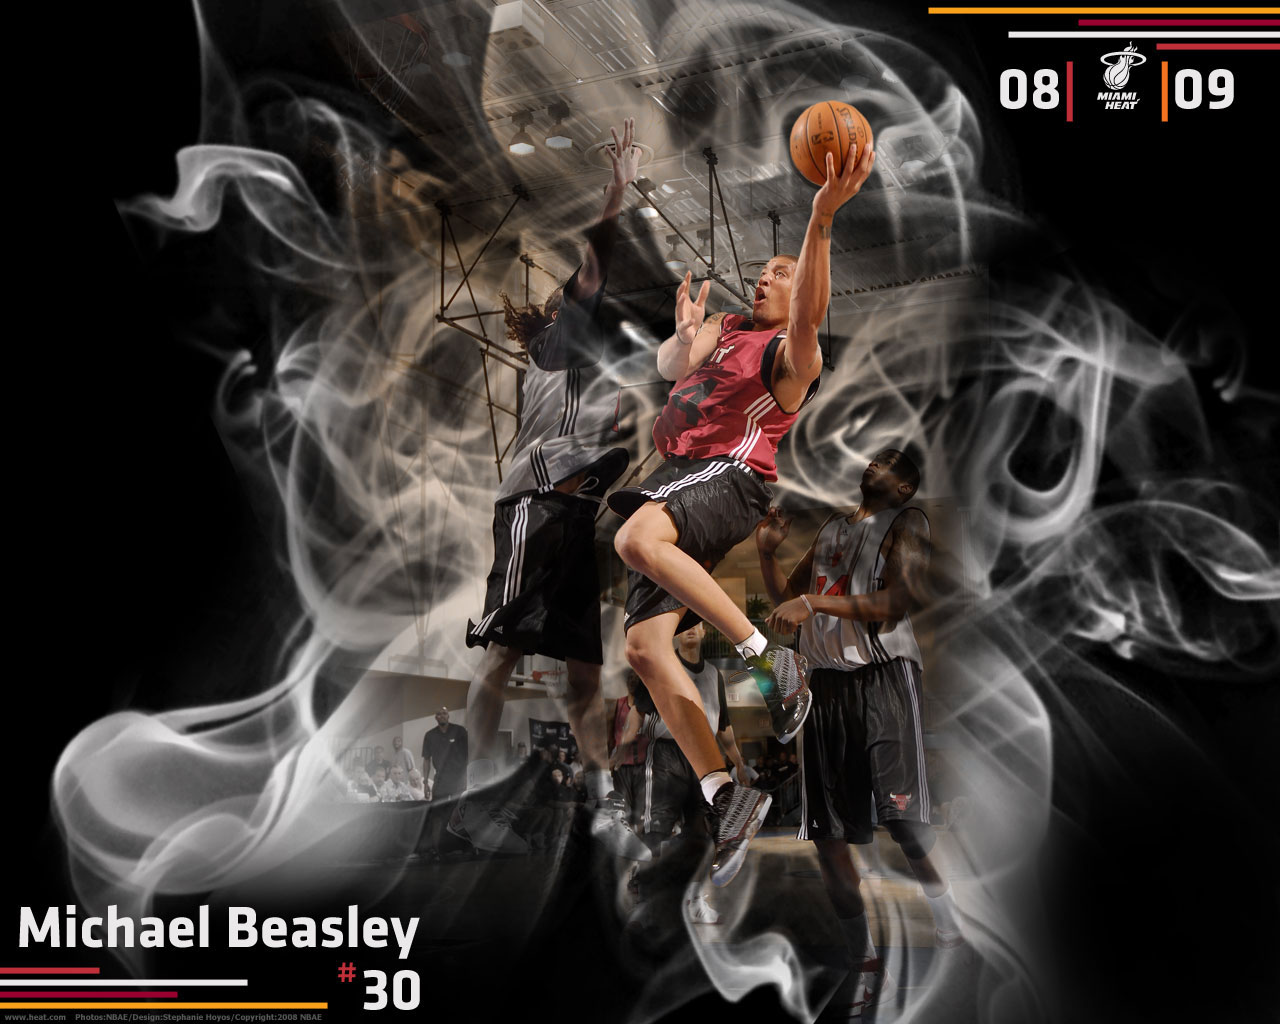  ... MIAMI HEAT jersey, wallpaper is made by Heat.com - the official web